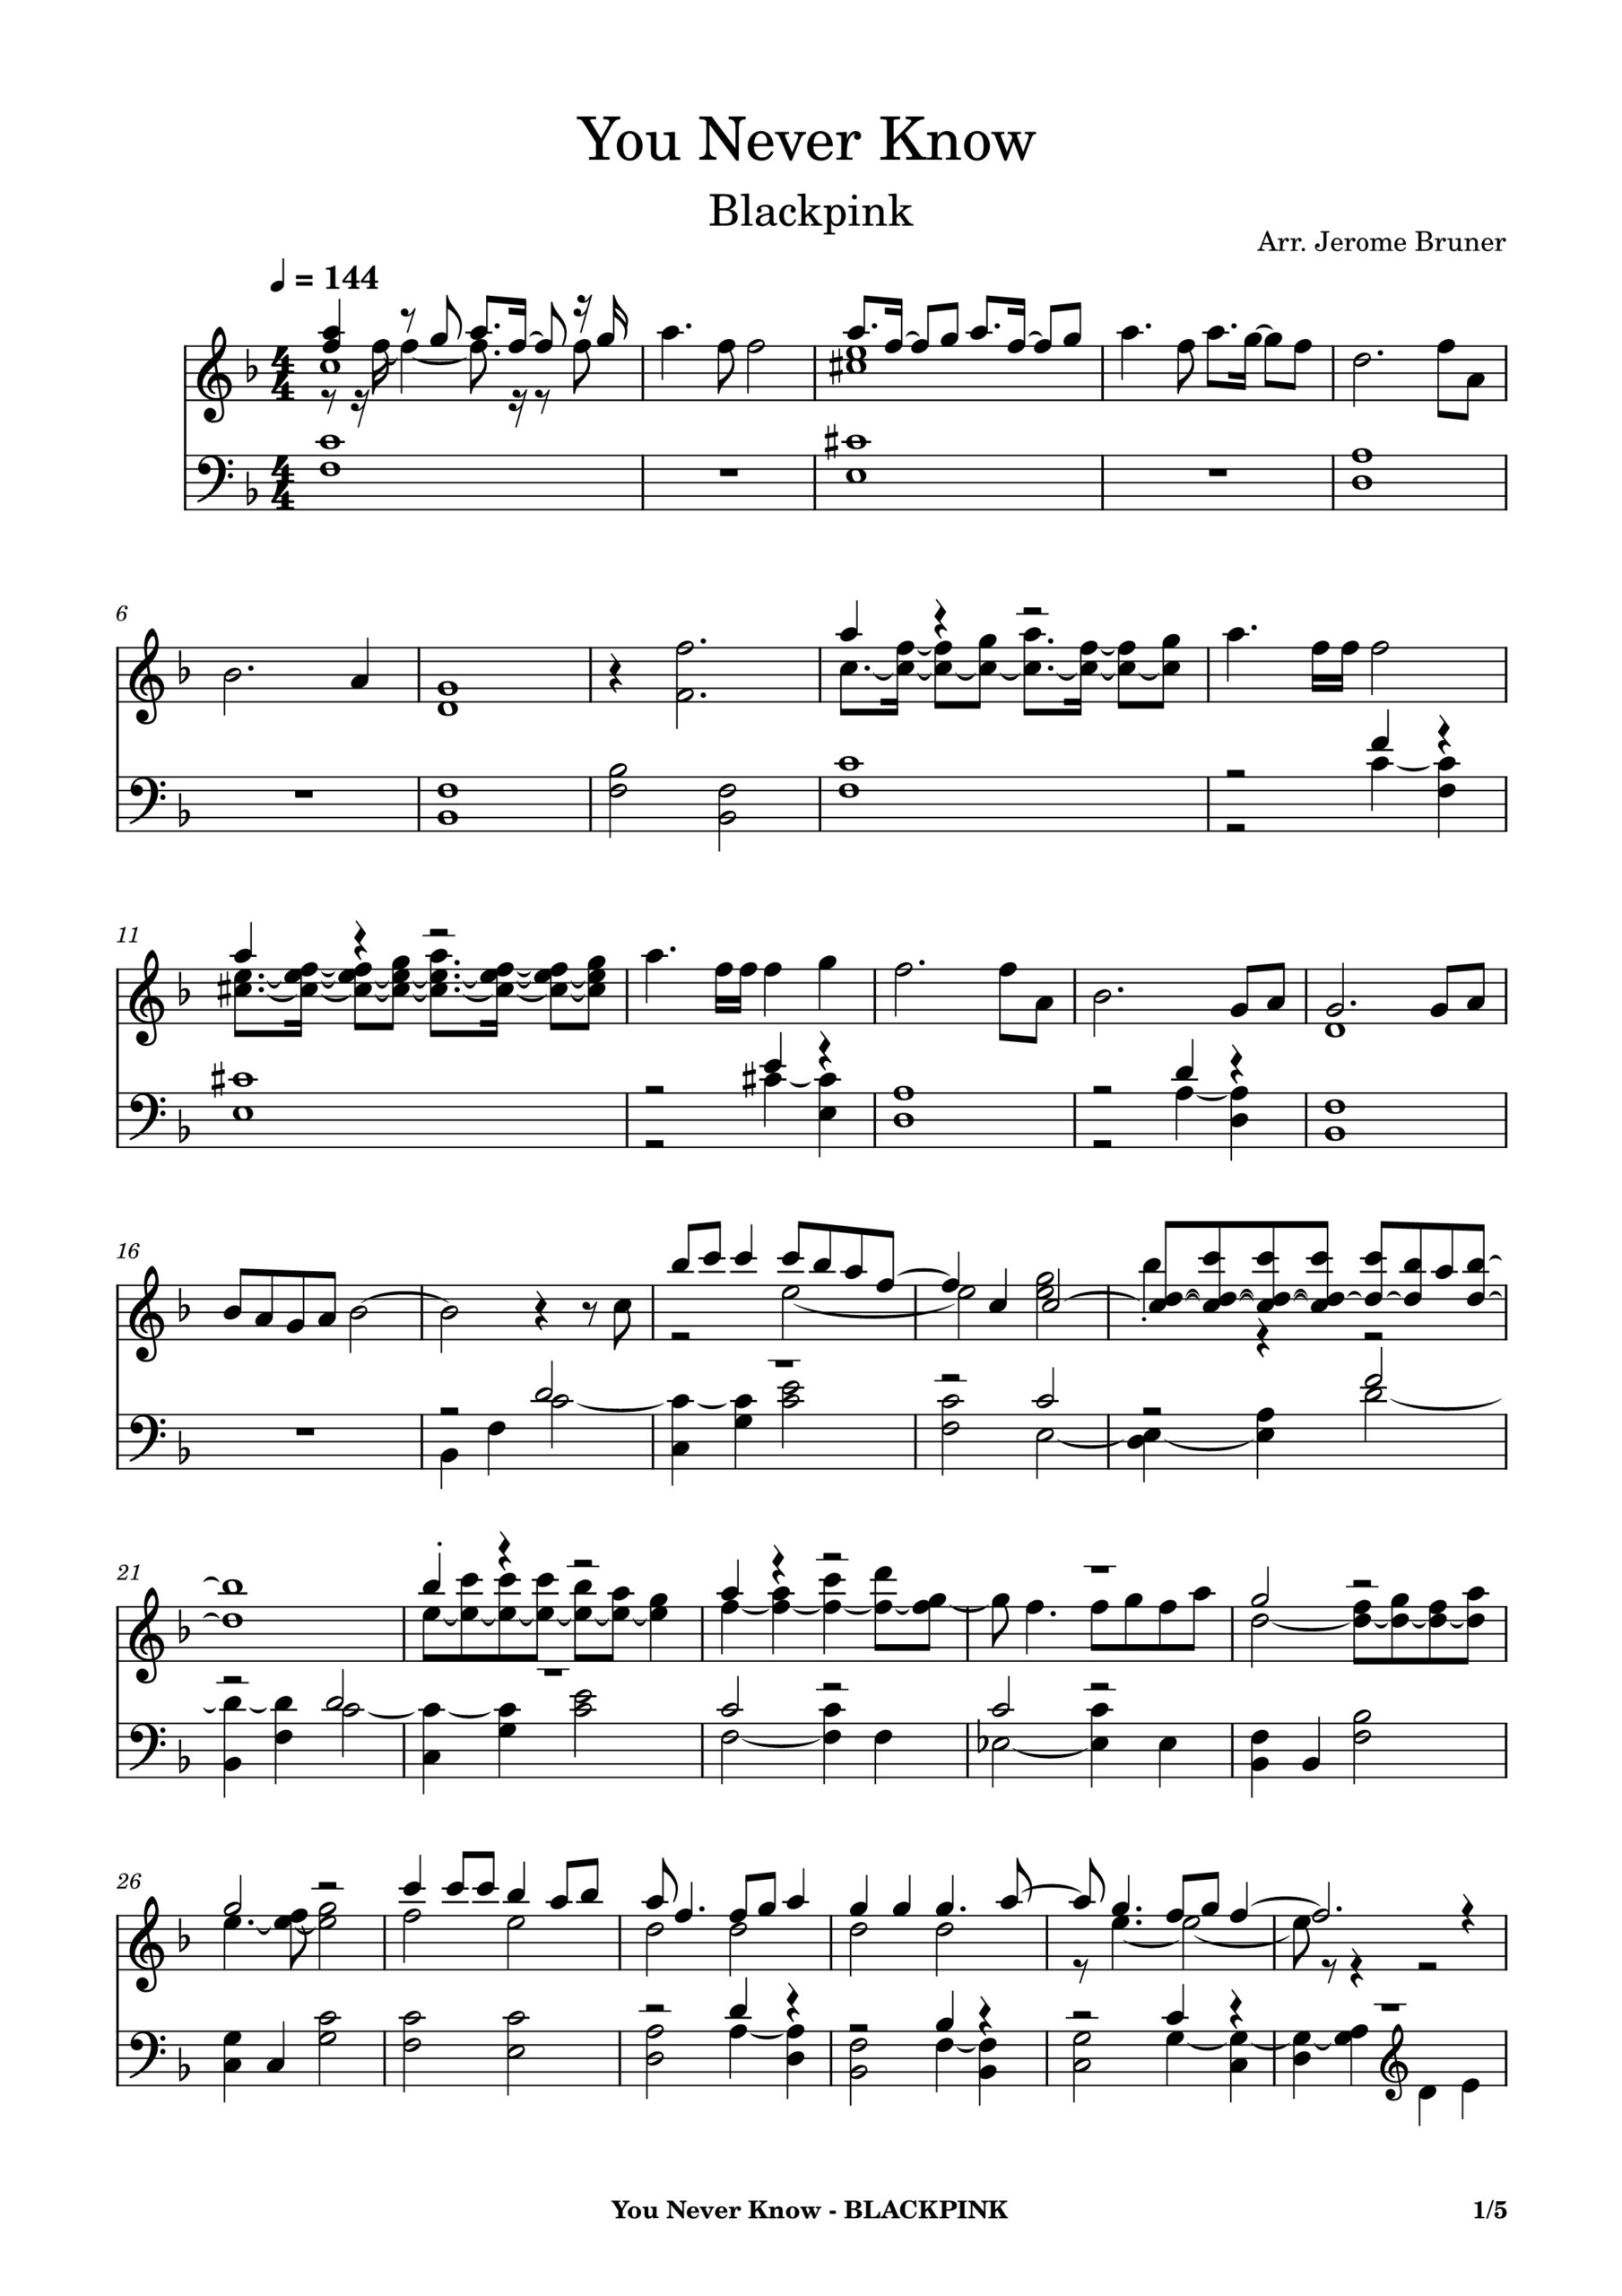 Blackpink, You Never Know Piano Sheet Music Page 1 of 5